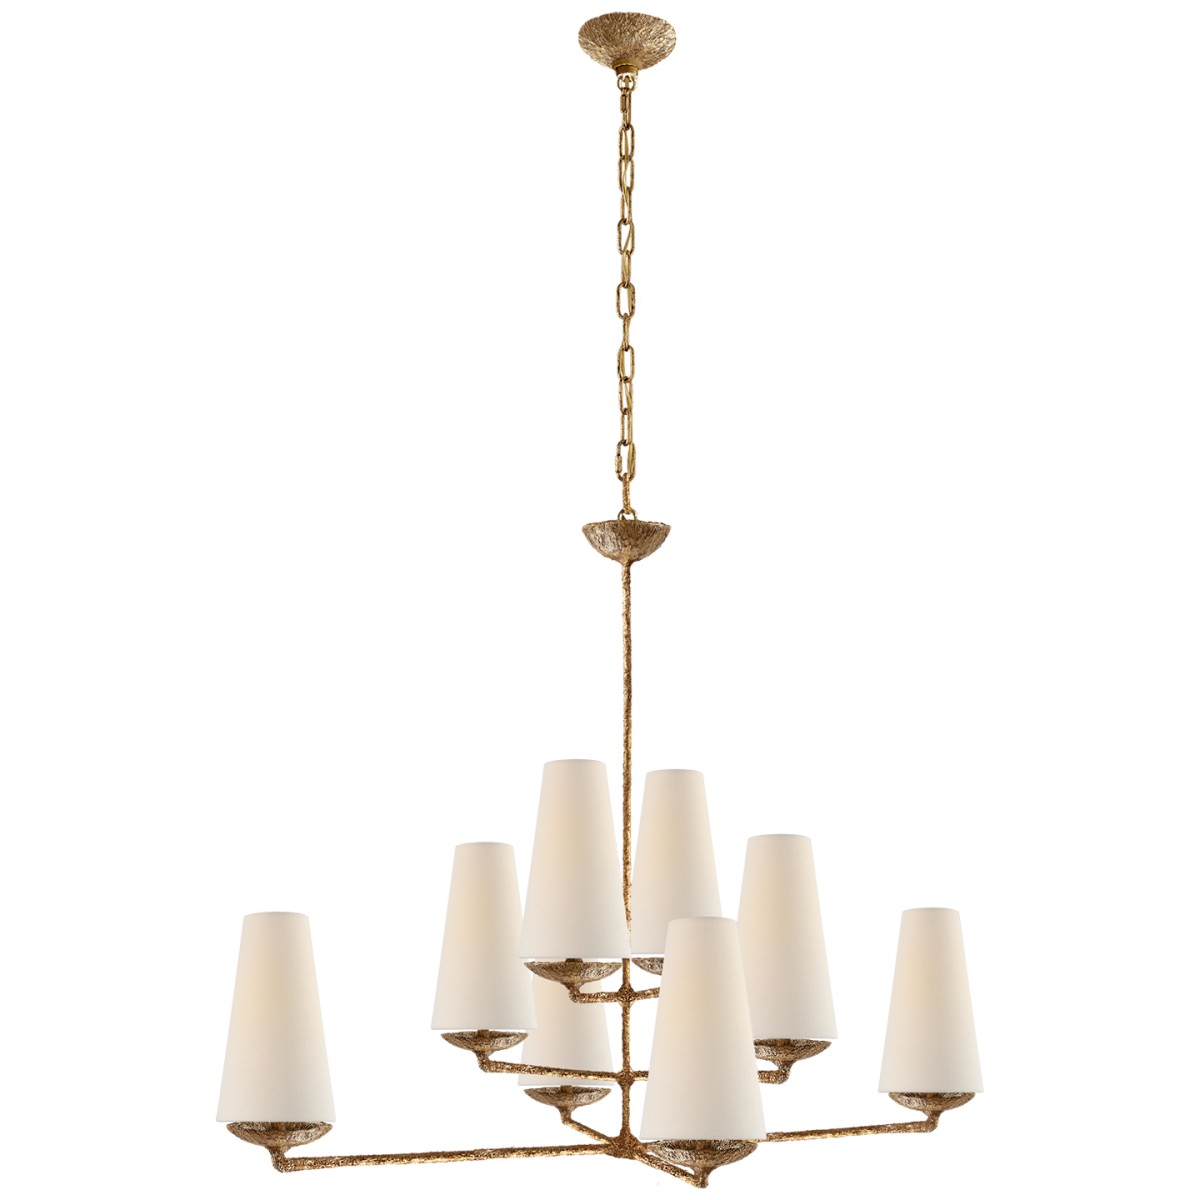 Fontaine Large Offset Chandelier with Linen Shades